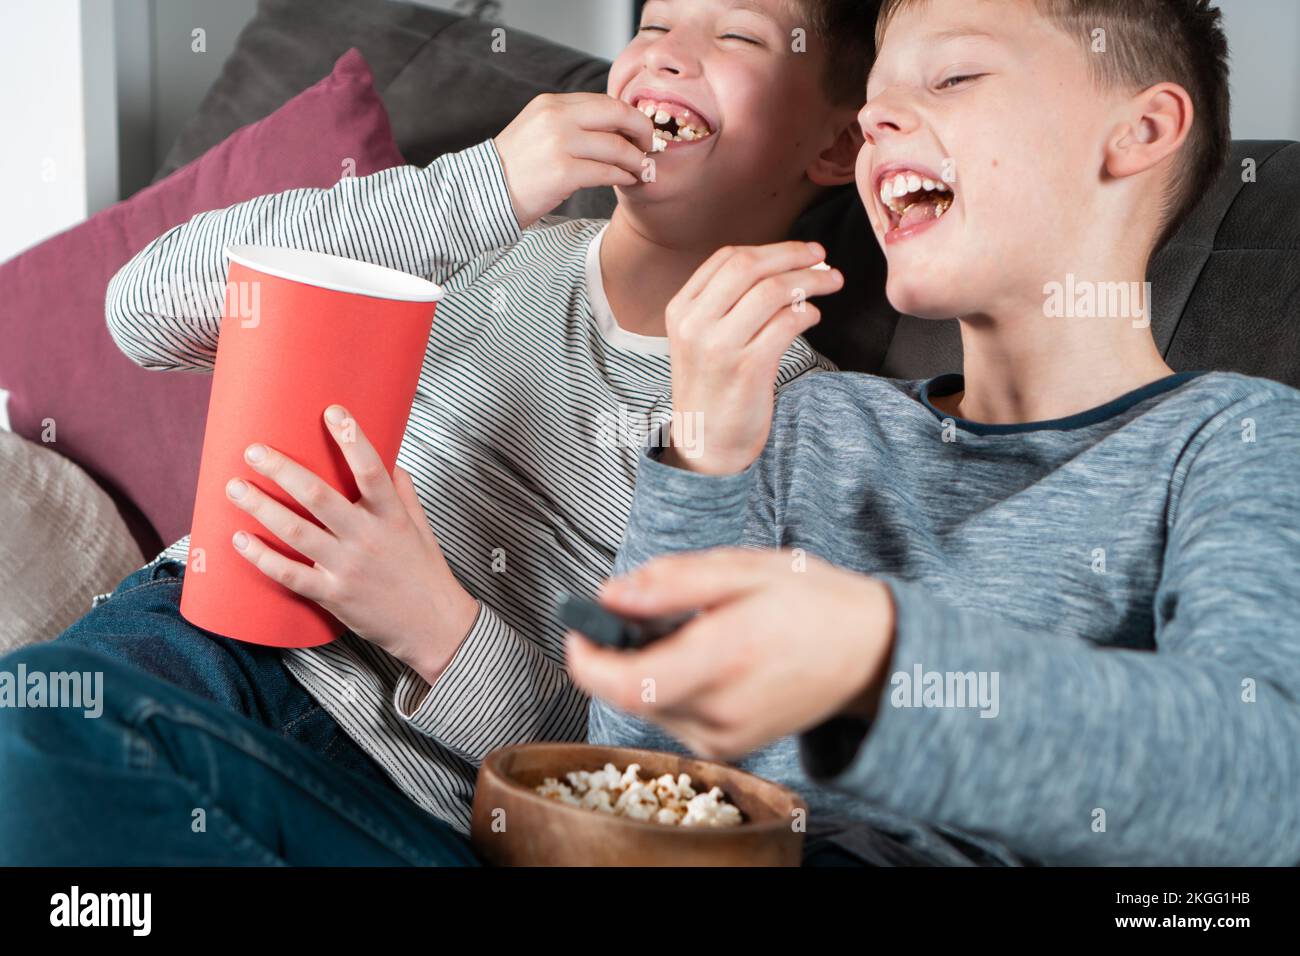 Portrait of two cheerful positive teenage boys sitting on sofa at home, watching funny movie comedy video cartoon on TV, eating popcorn from red Stock Photo